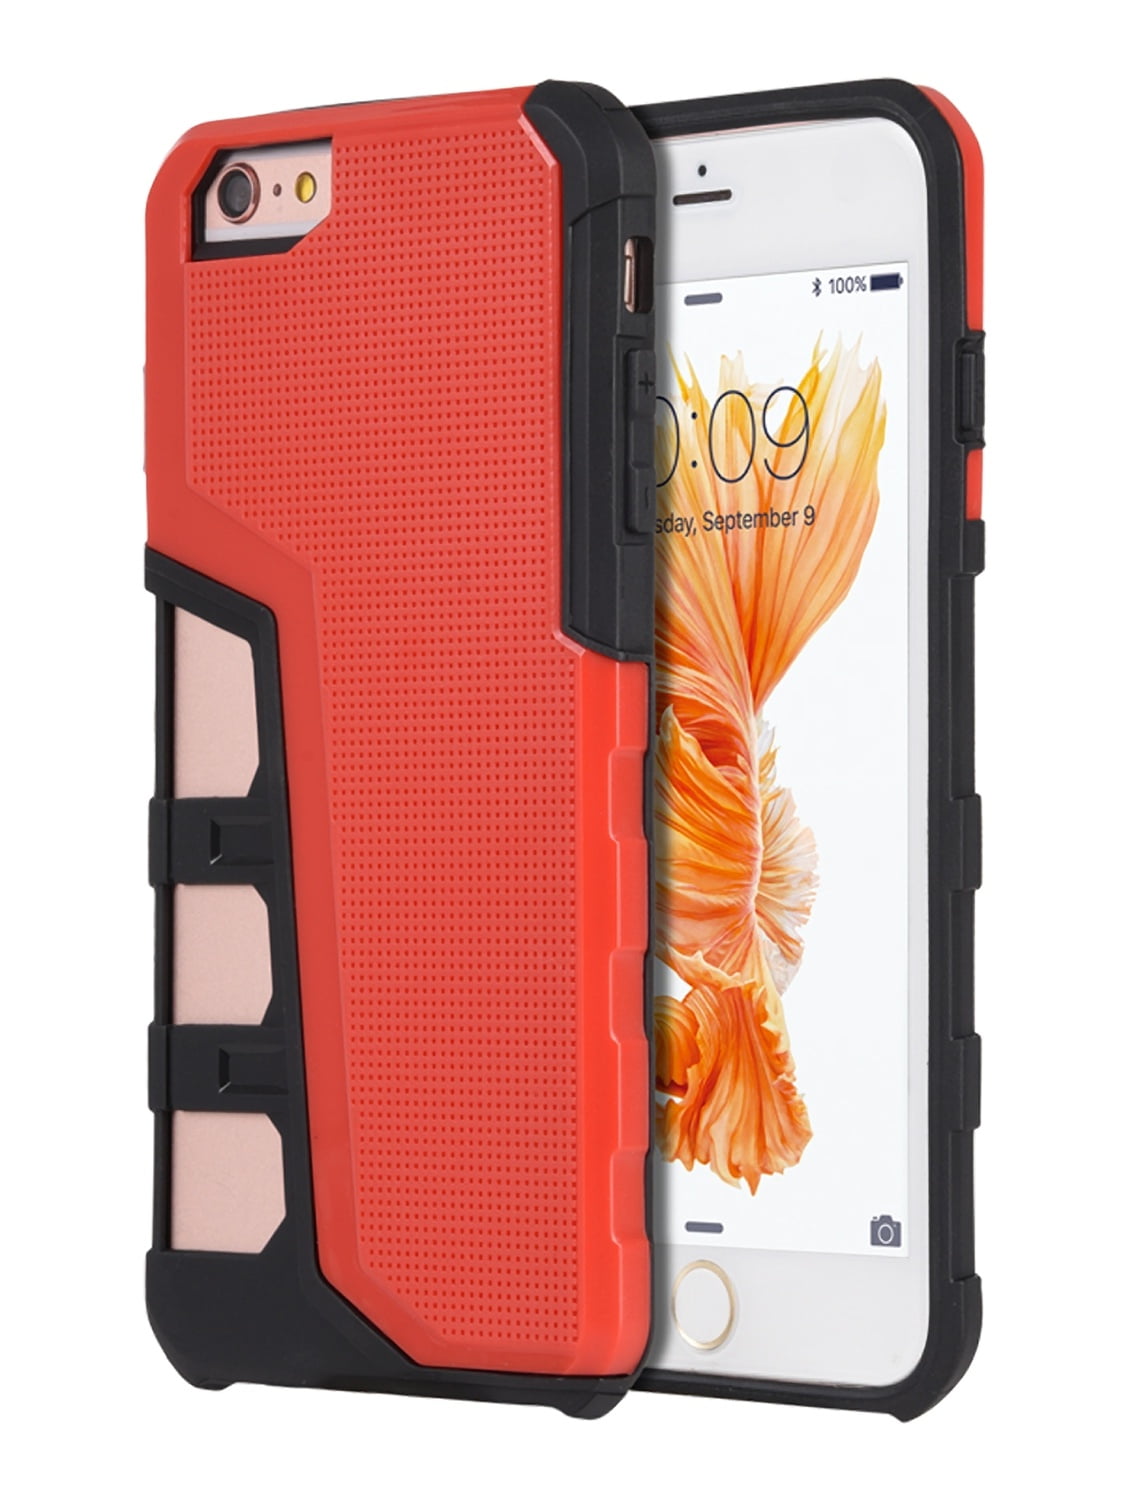 TCAIP6SL-HYPS-BKRD Hyper Sport Dual Hybrid TPU Case with PC Back Plate for iphone 6 & 6S Plus, Black & Red -  Dream Wireless